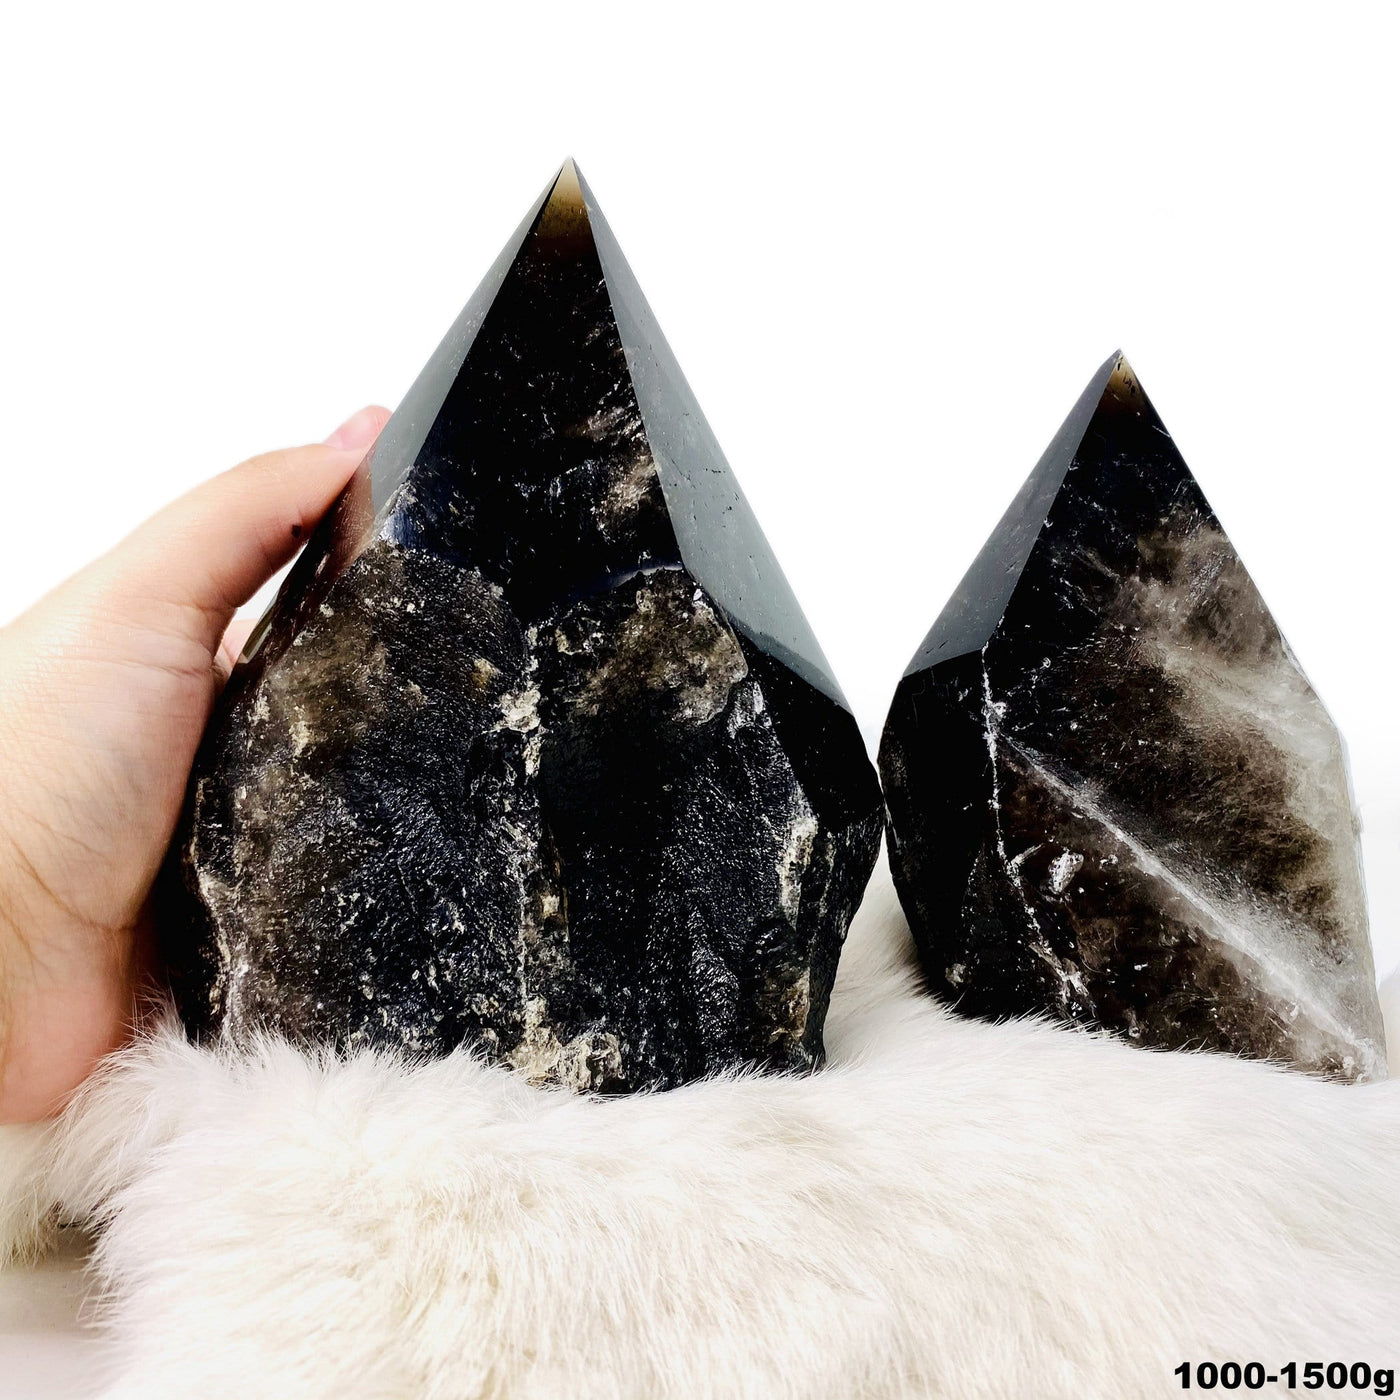 two 1000g - 1500g smokey quartz semi polished points on display for possible variations with one in hand for size reference